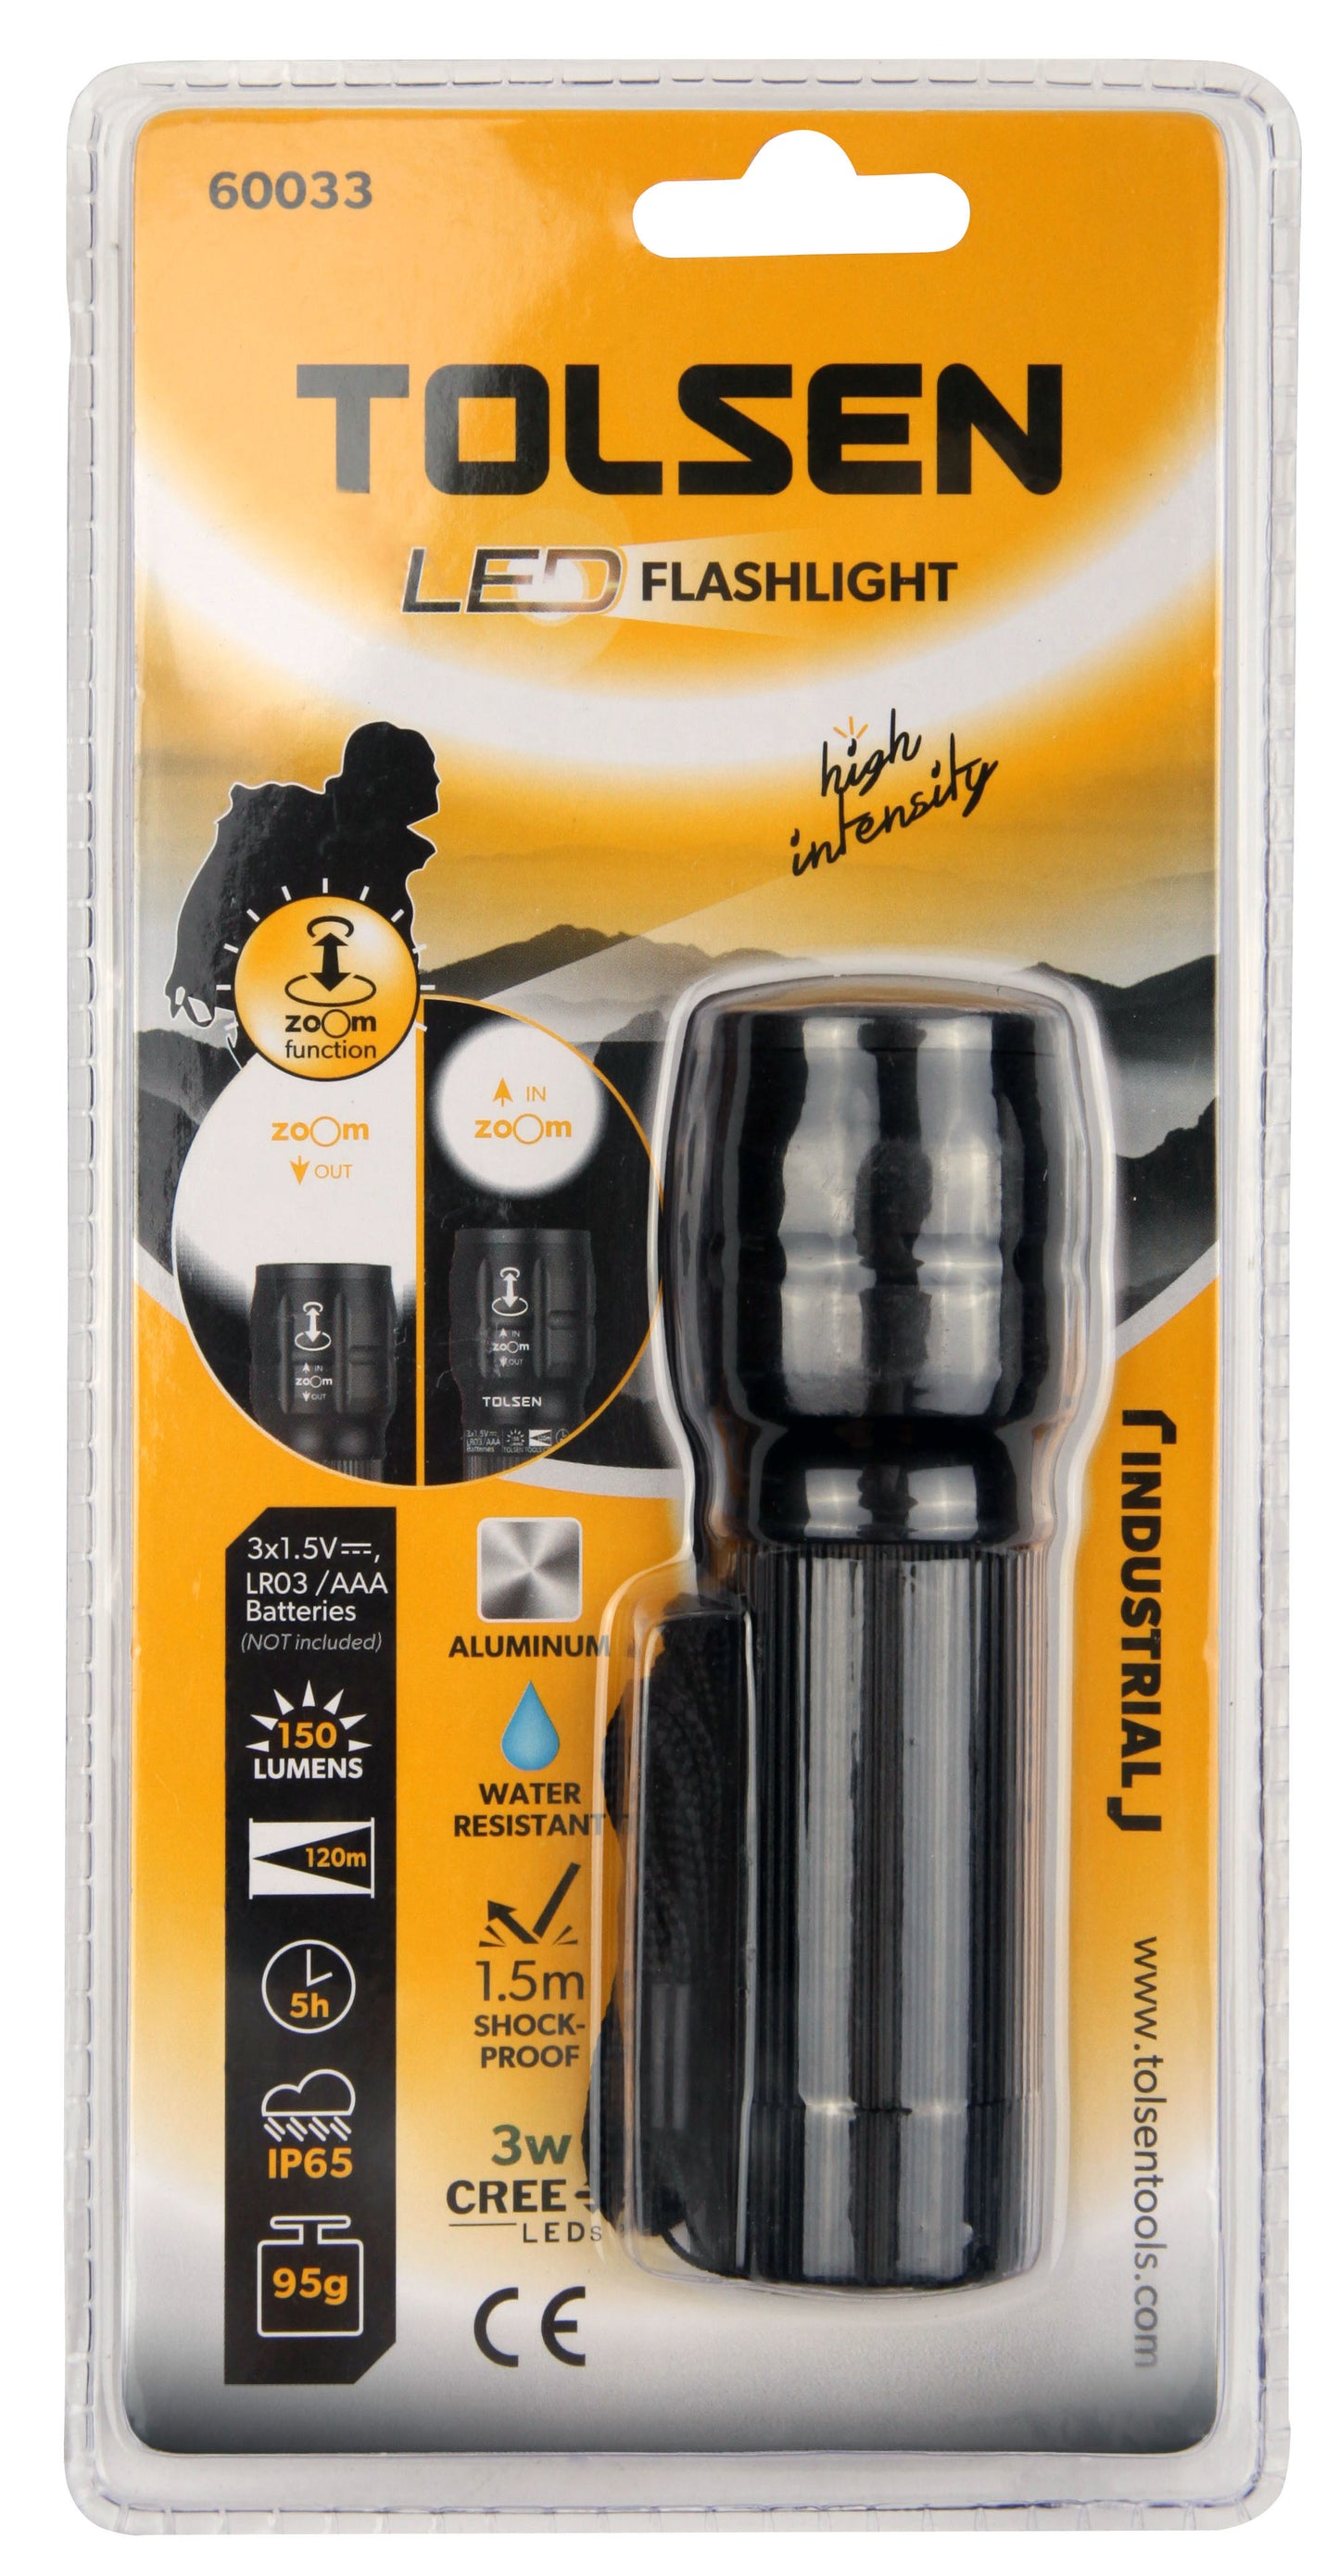 INDUSTRIAL LED FLASHLIGHT WITH ZOOM FUNCTION